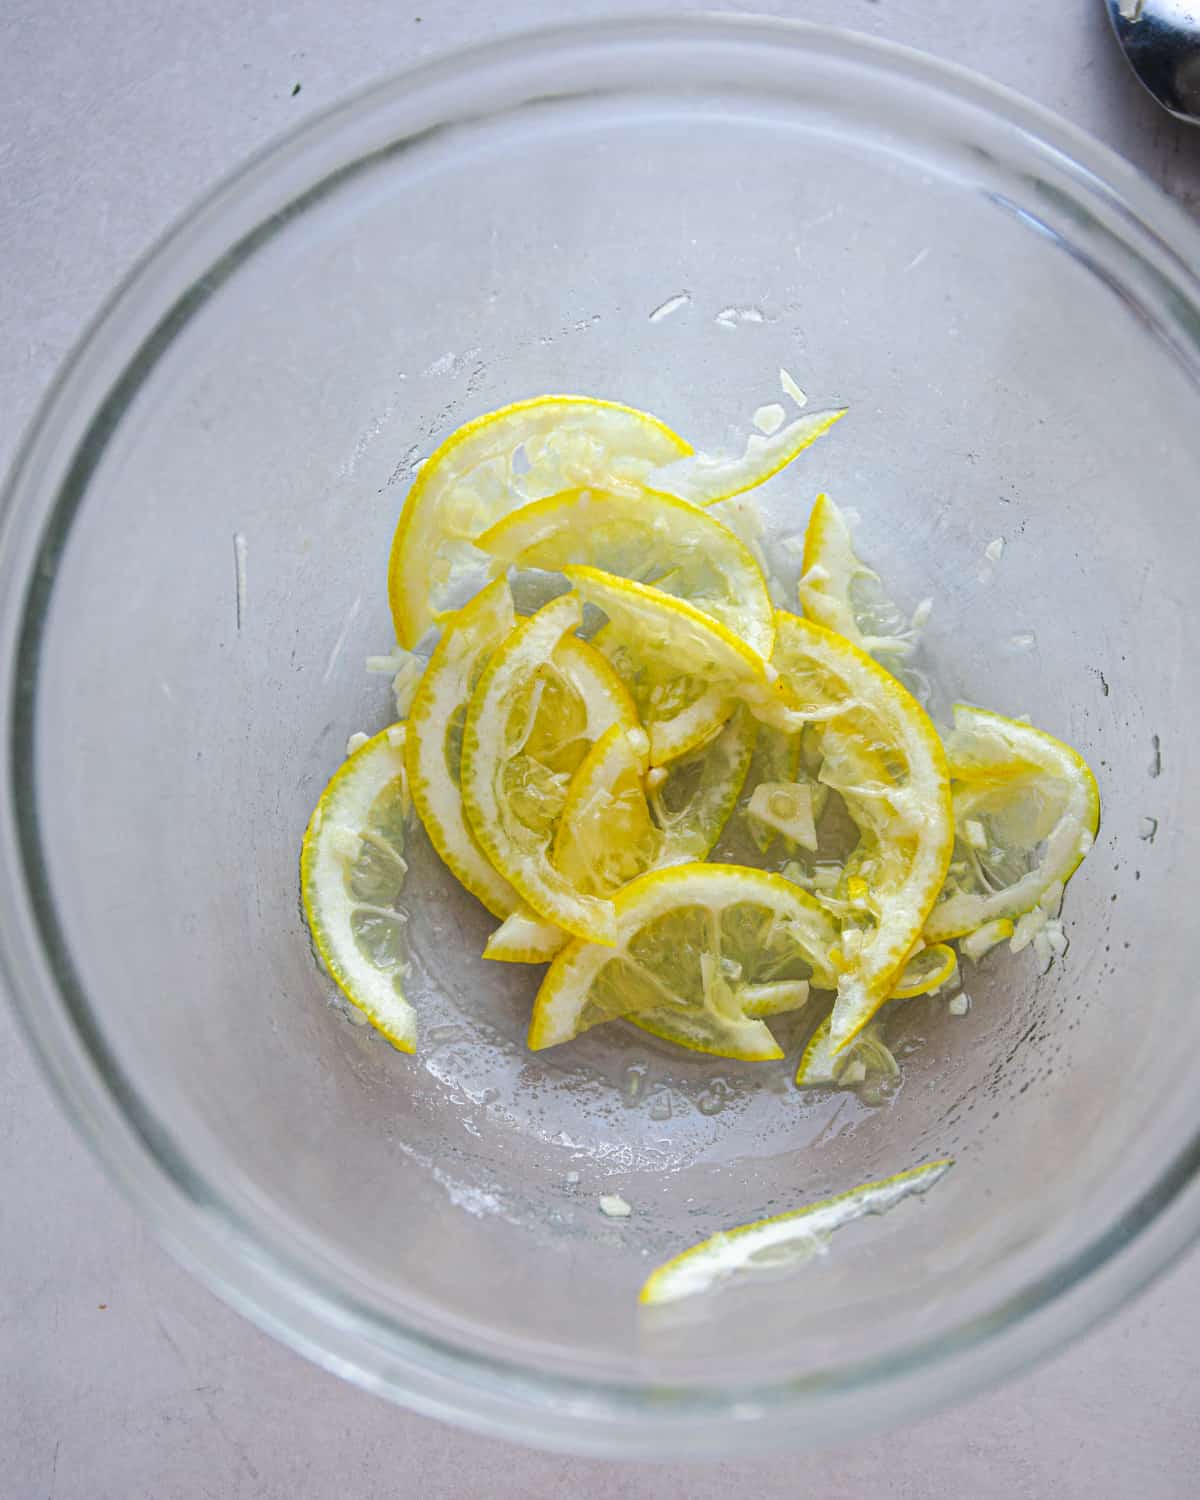 thin lemon slices and garlic in a glass bowl